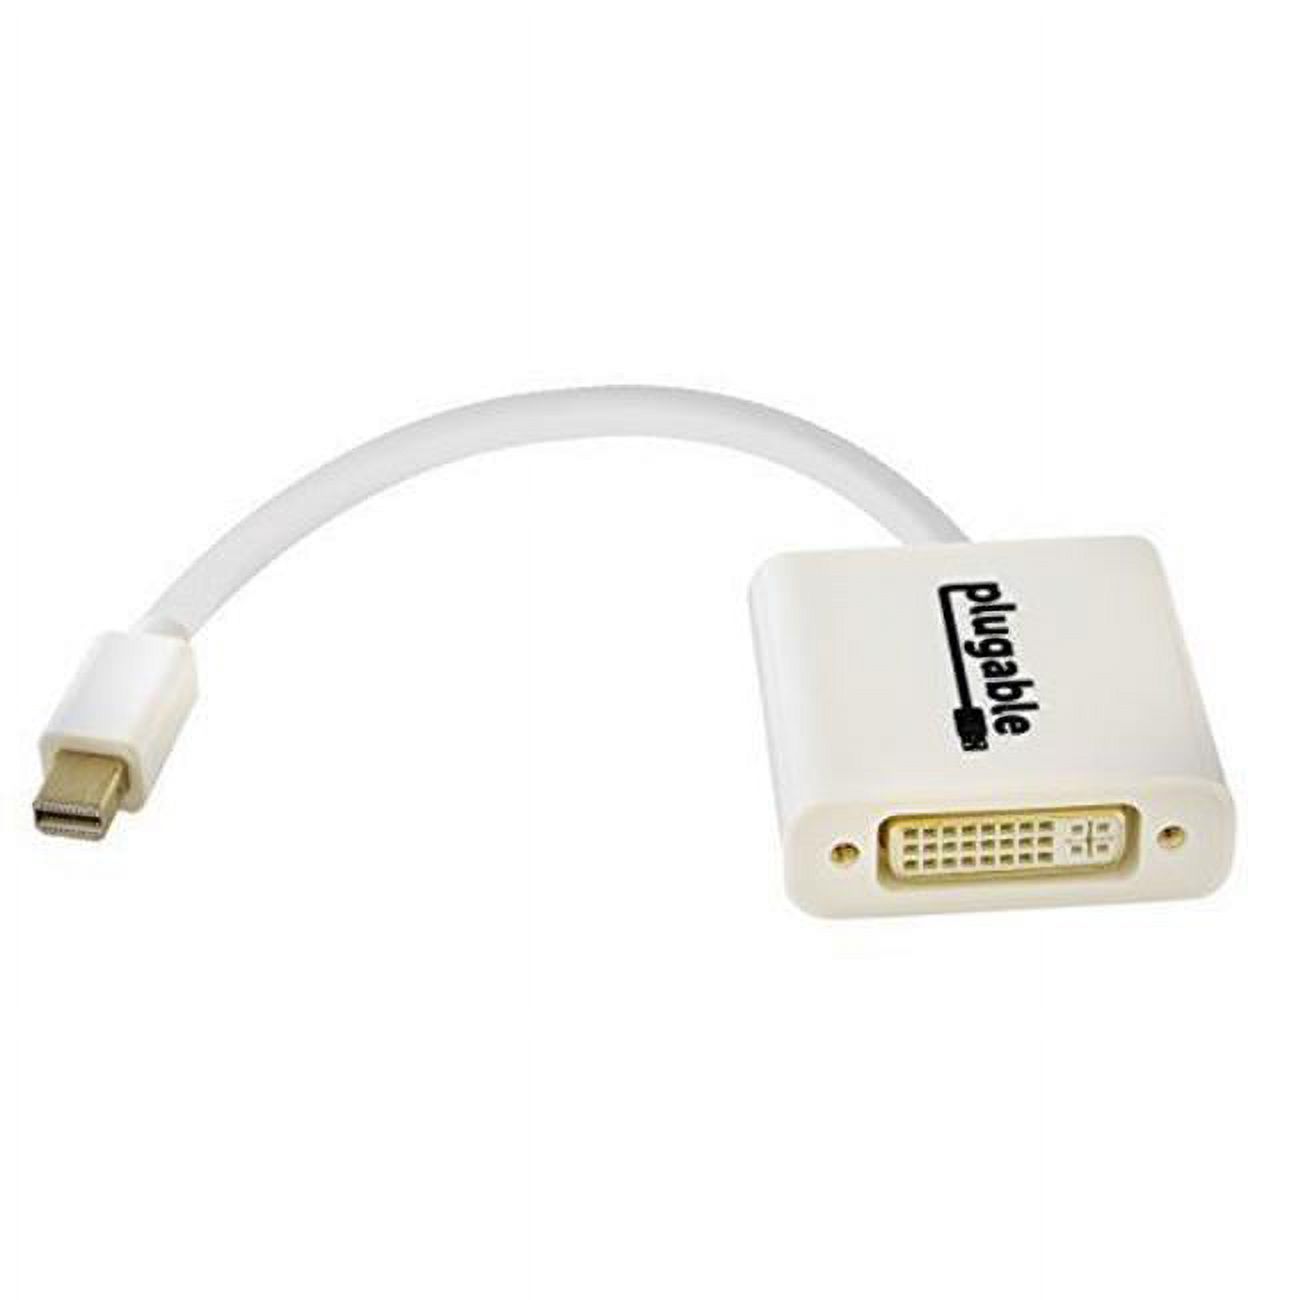 Plugable Mini DisplayPort (Thunderbolt 2) to DVI Adapter (Supports Mac, Windows, Linux Systems and Displays up to 1920x1200@60Hz, Passive). - image 1 of 4